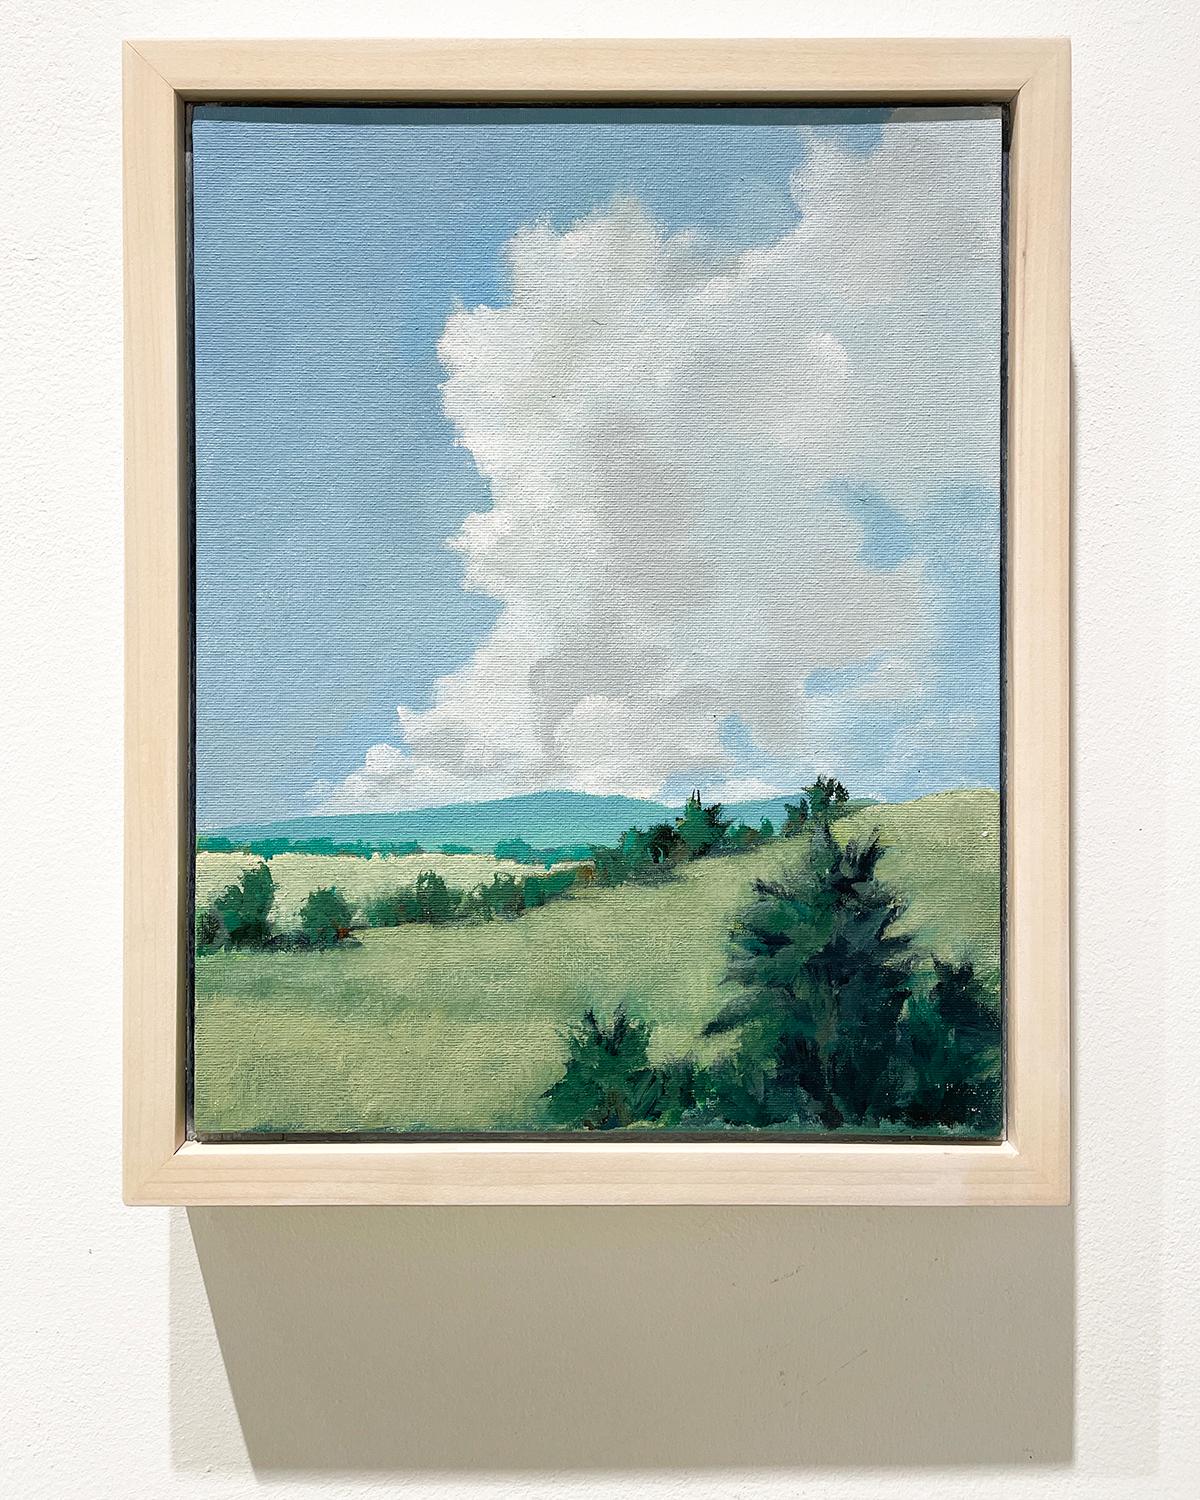 Catskills from Claverack (Plein Air Hudson Valley Landscape Painting, Framed)
14 x 11 inches, 15.75 x 12.75 inches framed, white stained wood floater frame

This landscape painting by the artist and carpenter Joseph Rapp depicts the Catskill